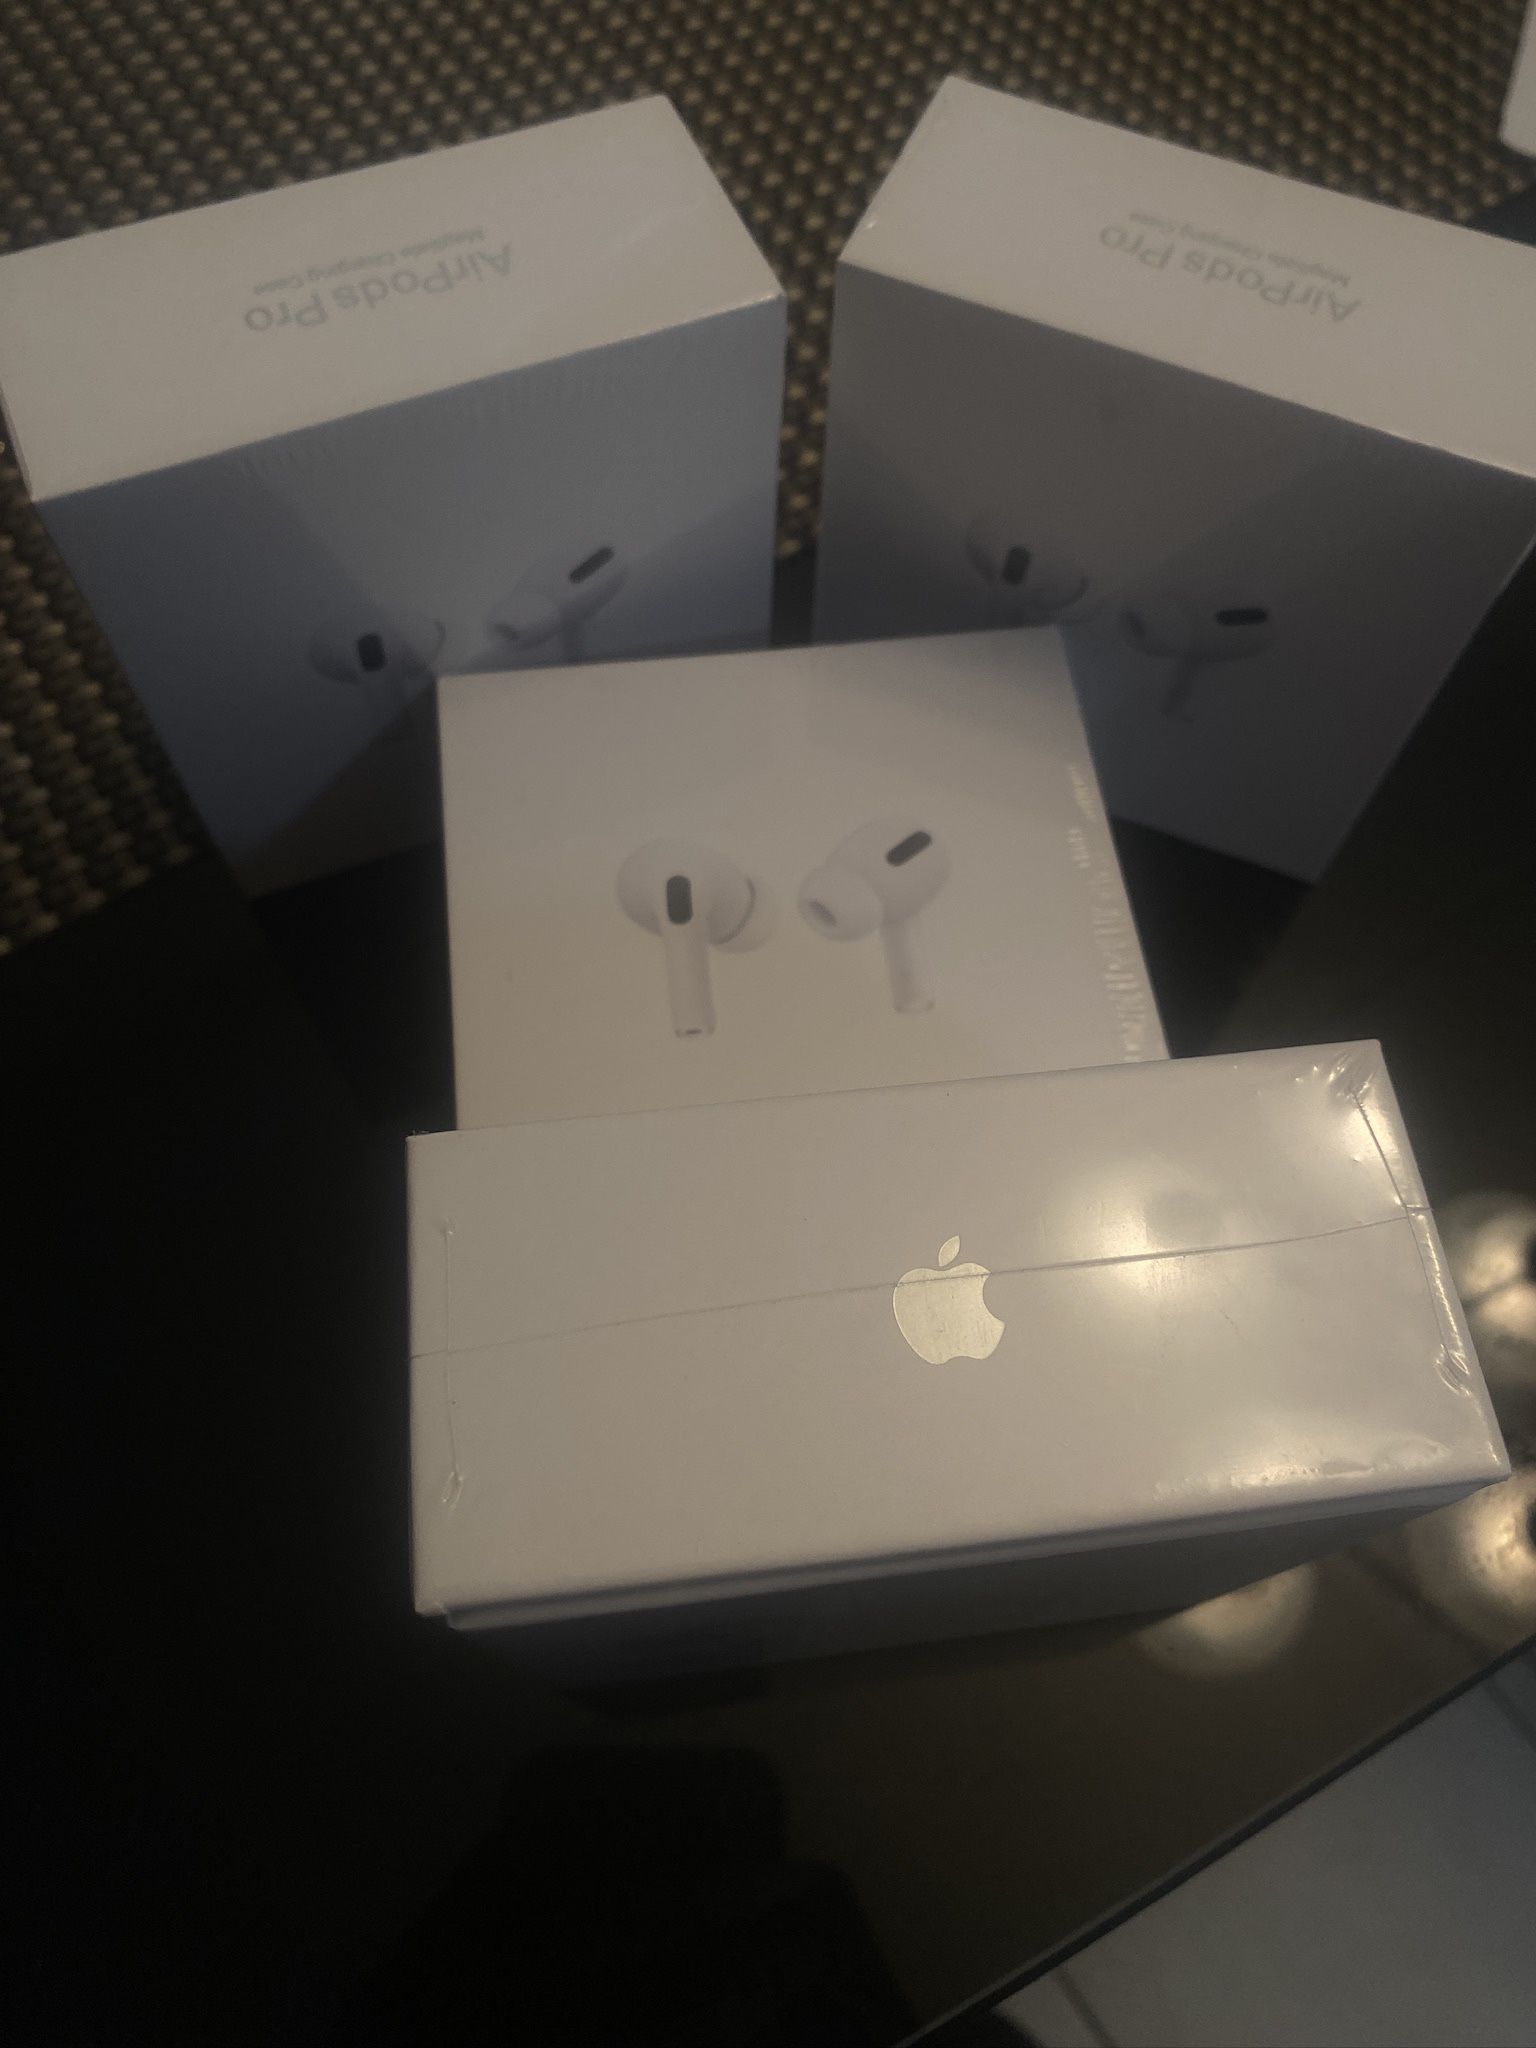 Apple AirPods Pro with Magsafe Charging Case